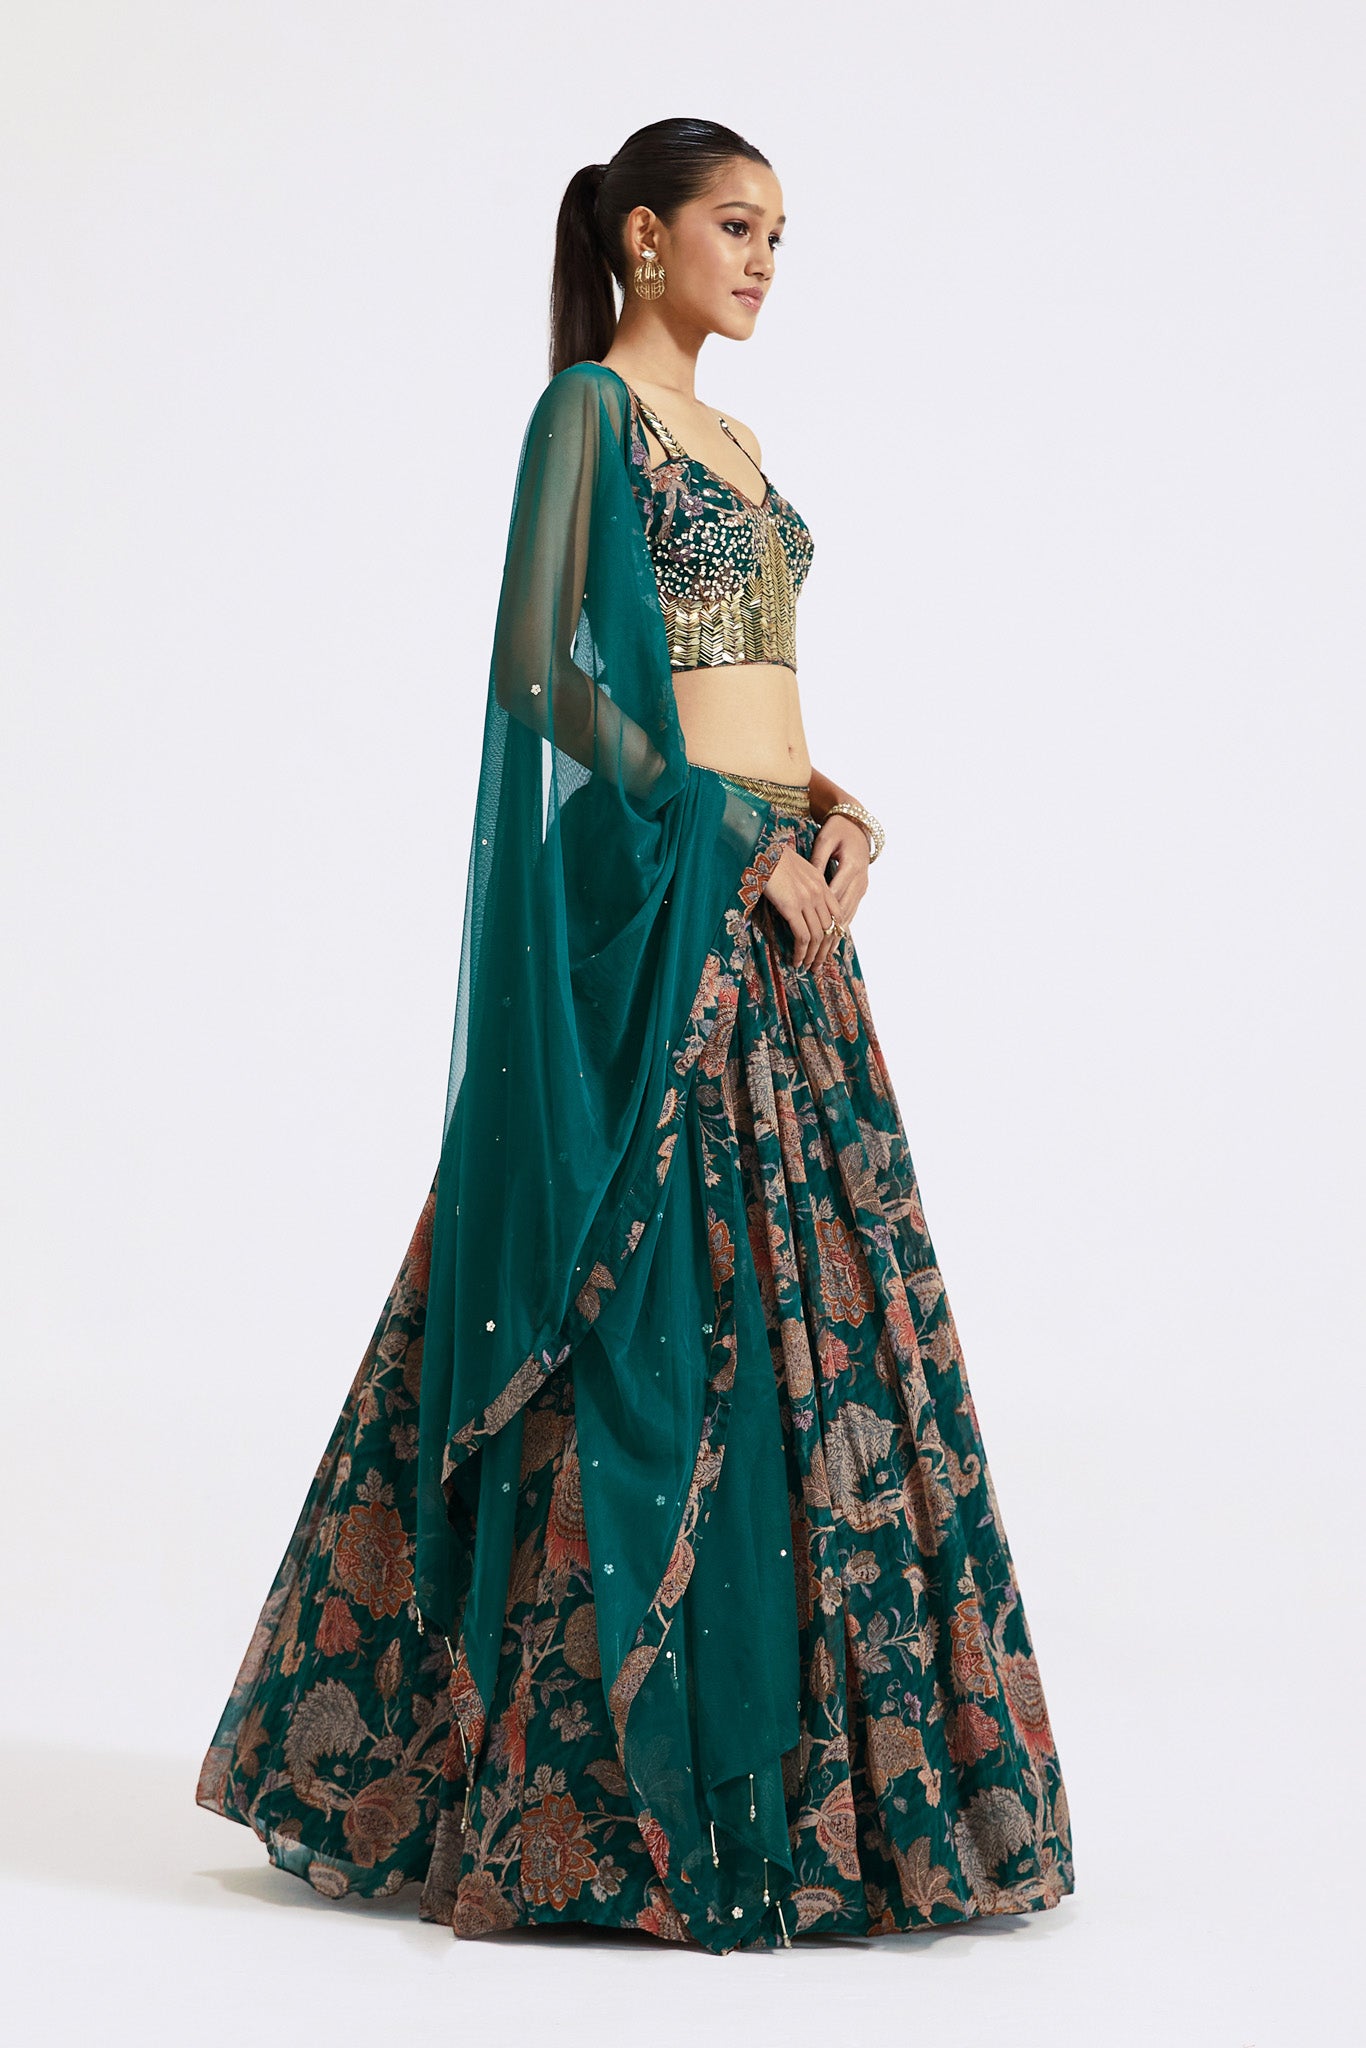 Shop dark green printed georgette lehenga online in USA with dupatta. Shop the best and latest designs in embroidered sarees, designer sarees, Anarkali suit, lehengas, sharara suits for weddings and special occasions from Pure Elegance Indian fashion store in USA.-side